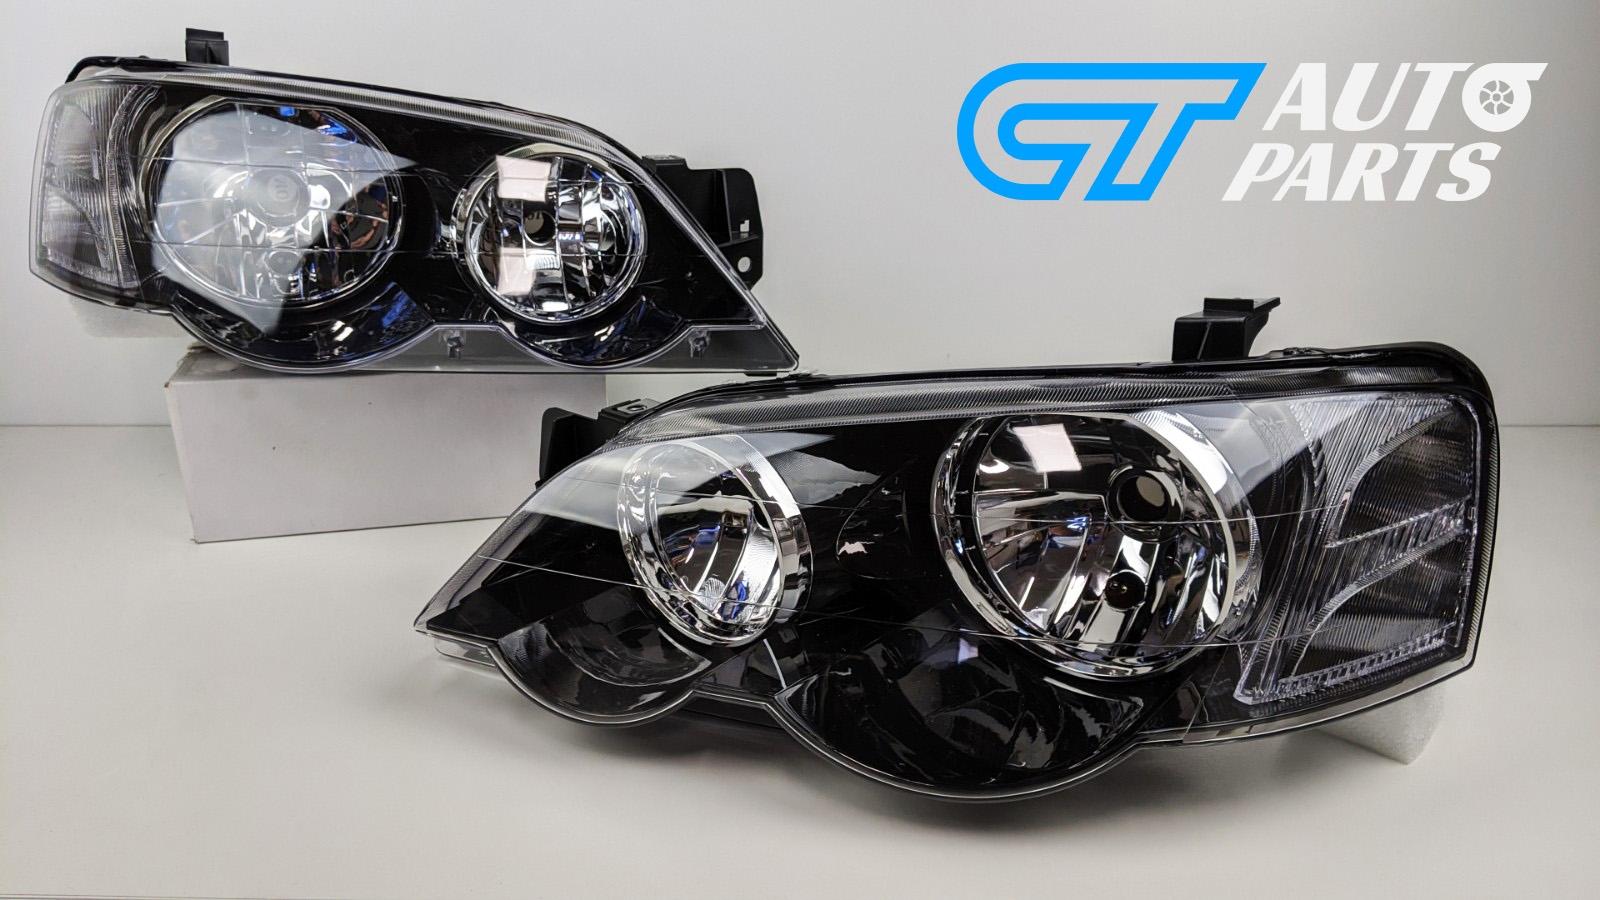 Product Sports Version Black Head Lights for 02-06 Ford Falcon BA BF XR6 XR8 Farimont FPV Sedan Ute - CT AutoParts image